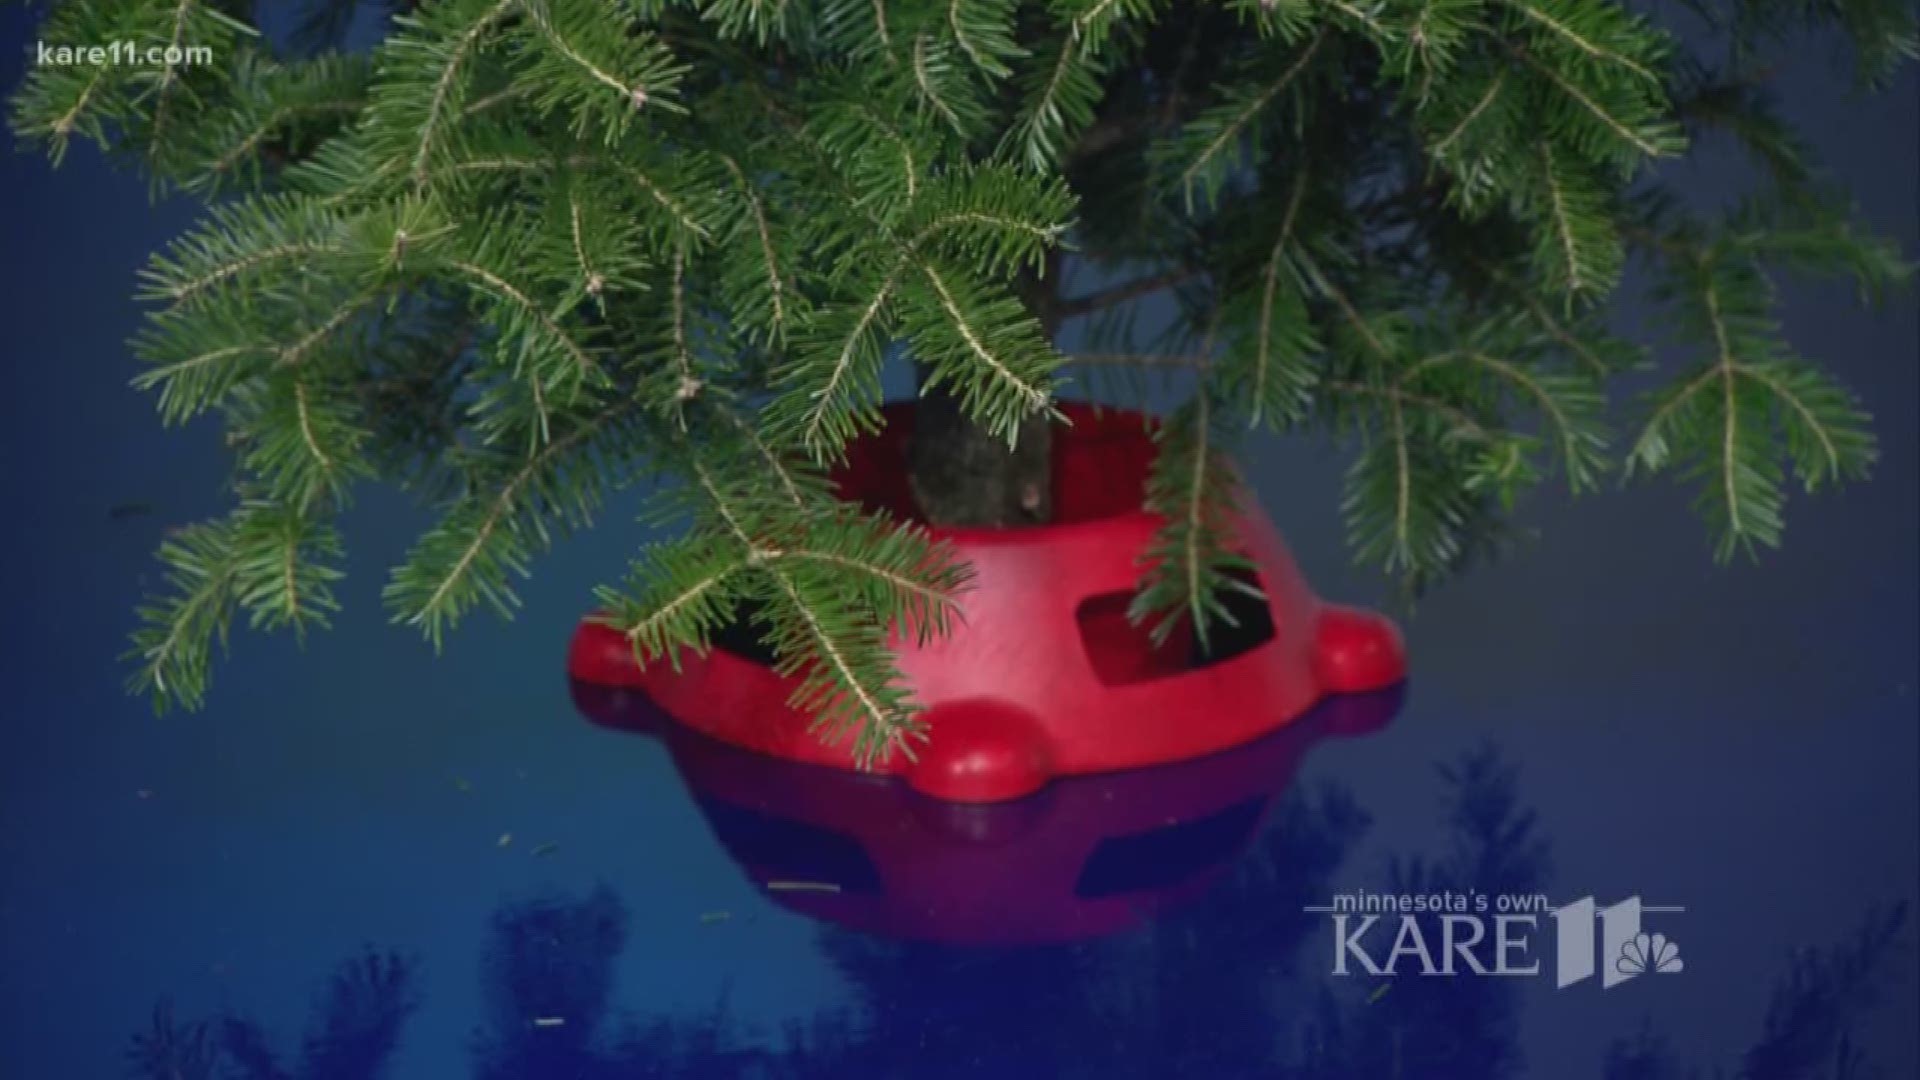 Adam Bachman from Bachman's has some tips for finding the perfect Christmas tree